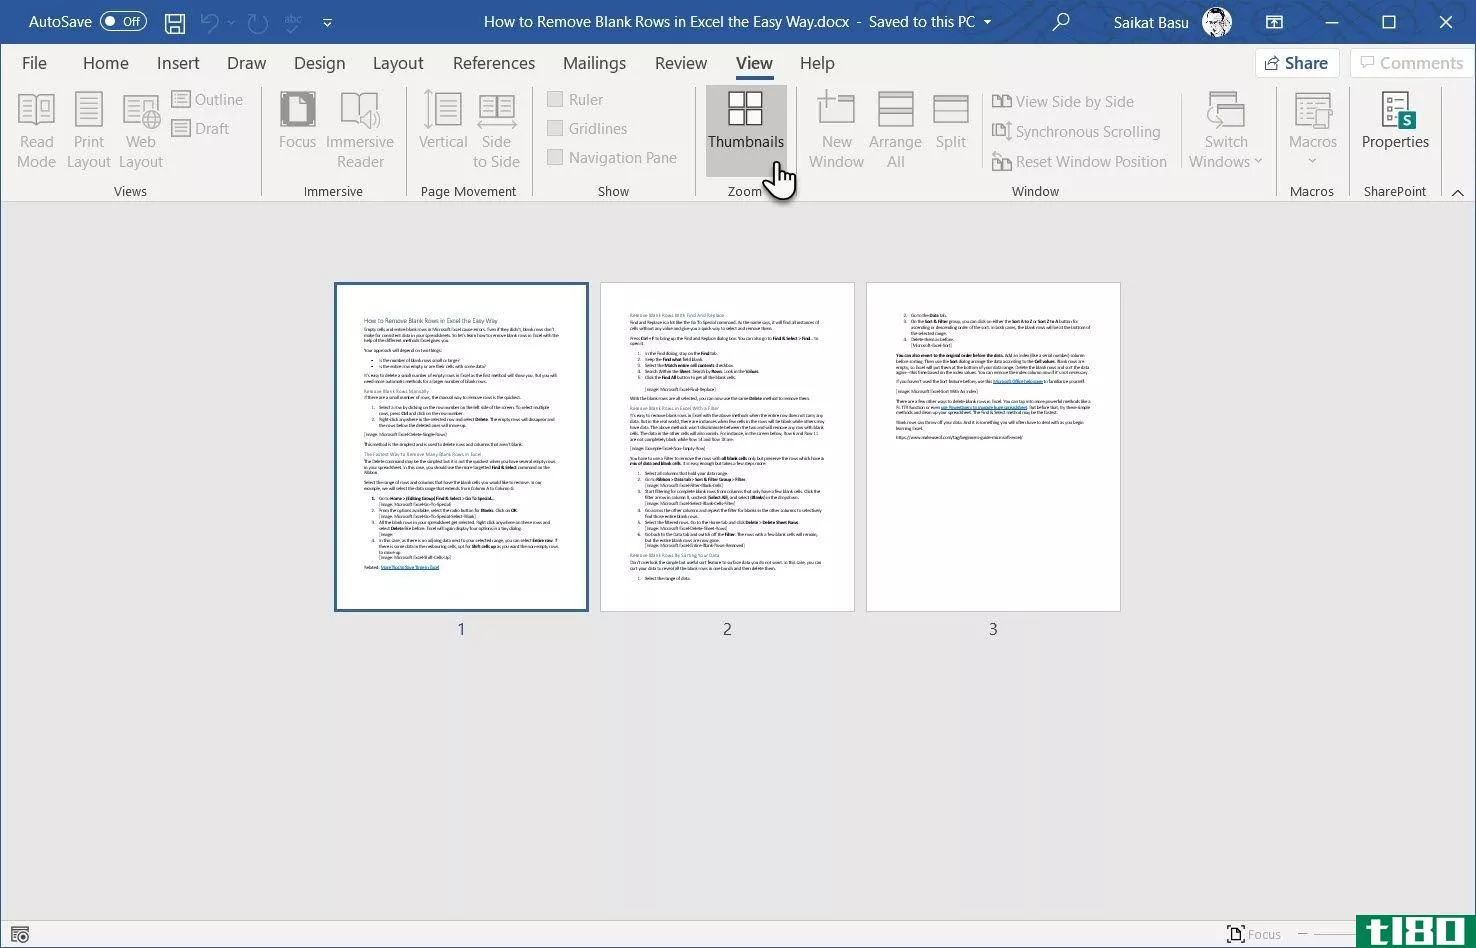 Microsoft Word Thumbnails in the Side to Side View 